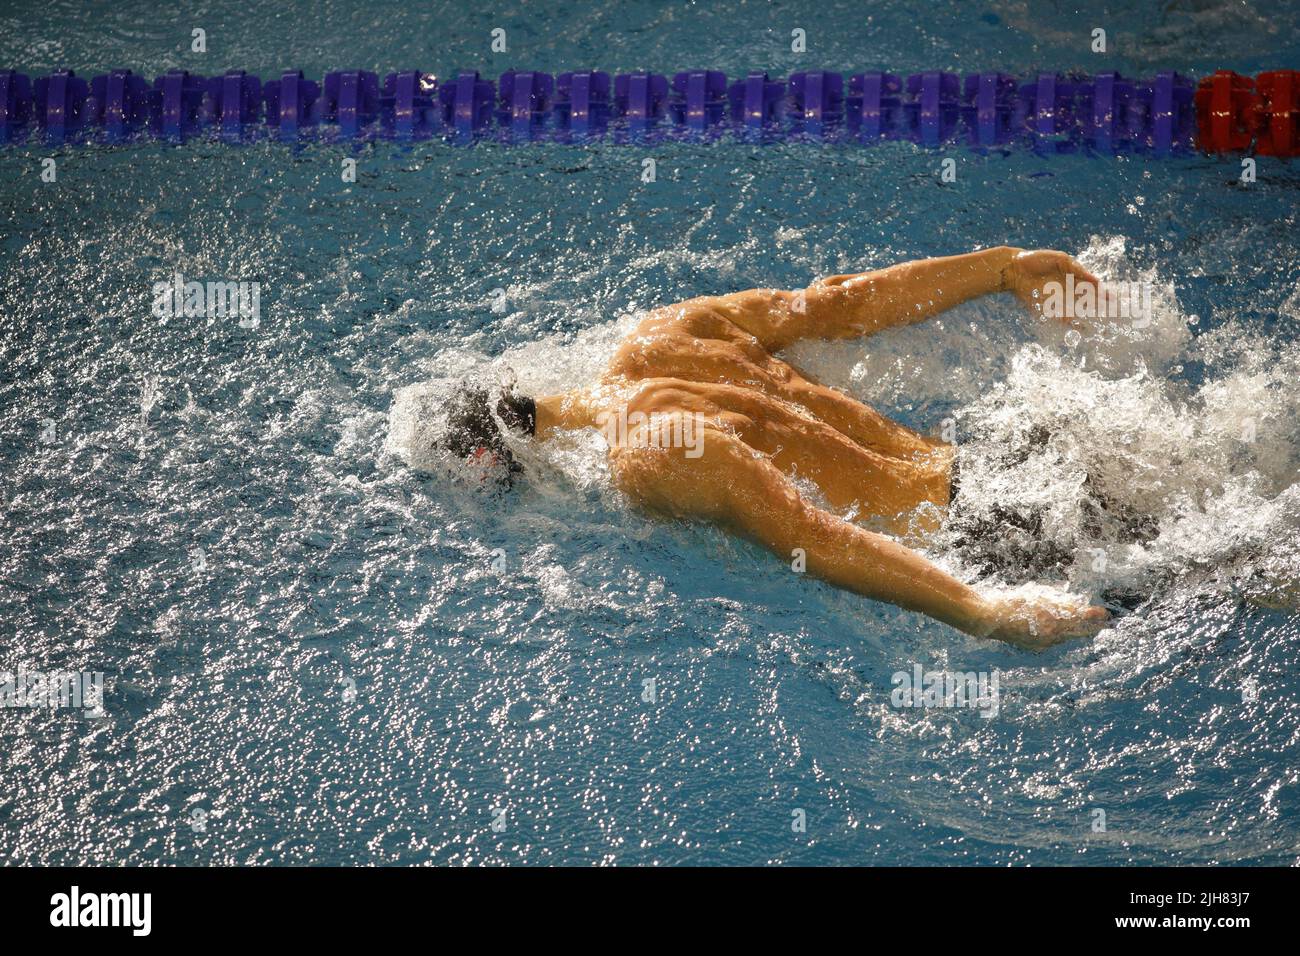 Details with a professional male athlete swimming in an olympic swimming pool butterfly style. Stock Photo